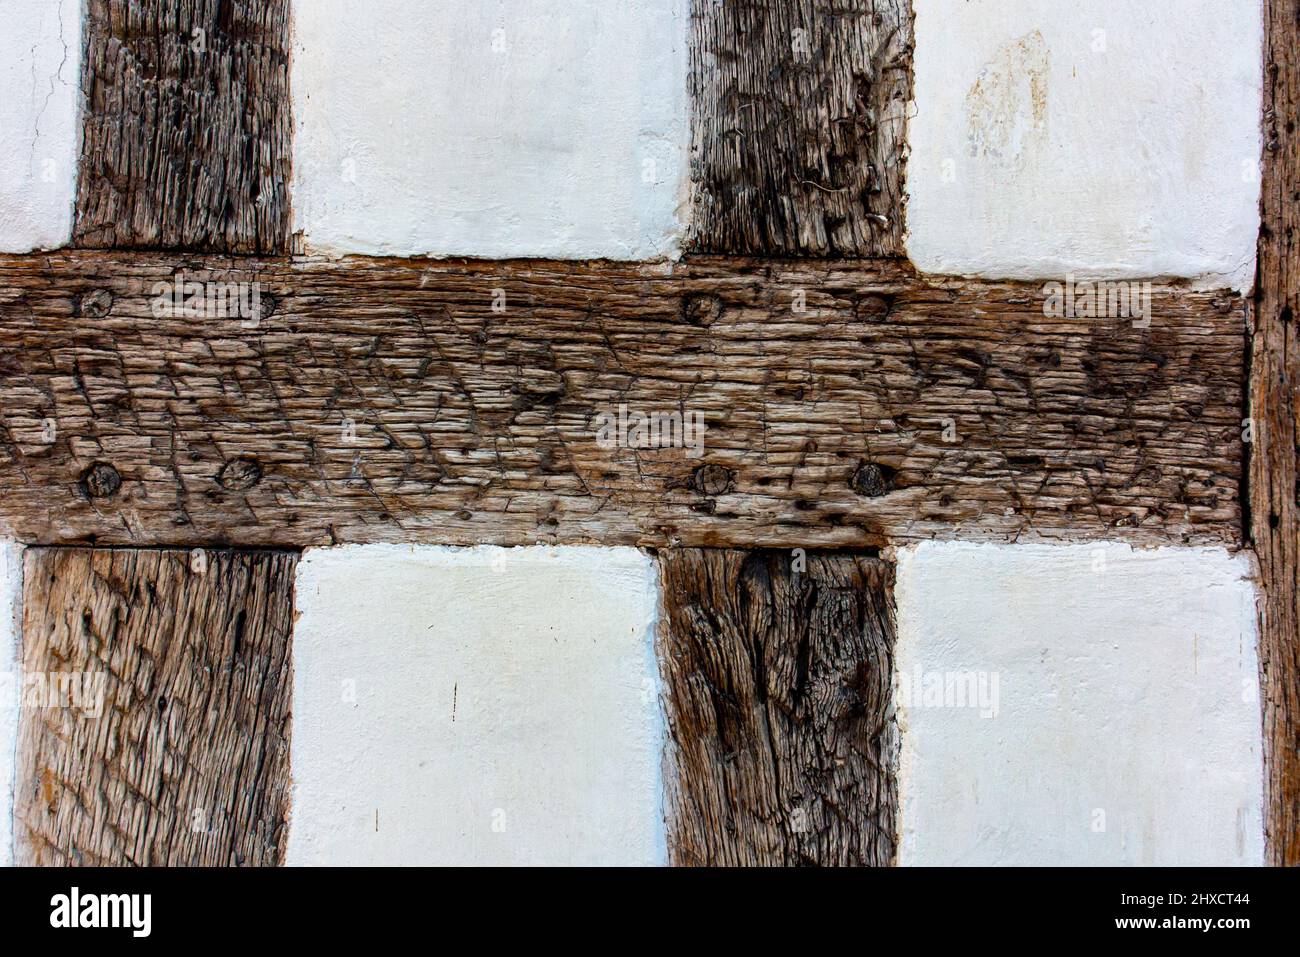 Close up view of timbers and white wall on a medieval building in Tewkesbury Gloucestershire England UK. Stock Photo